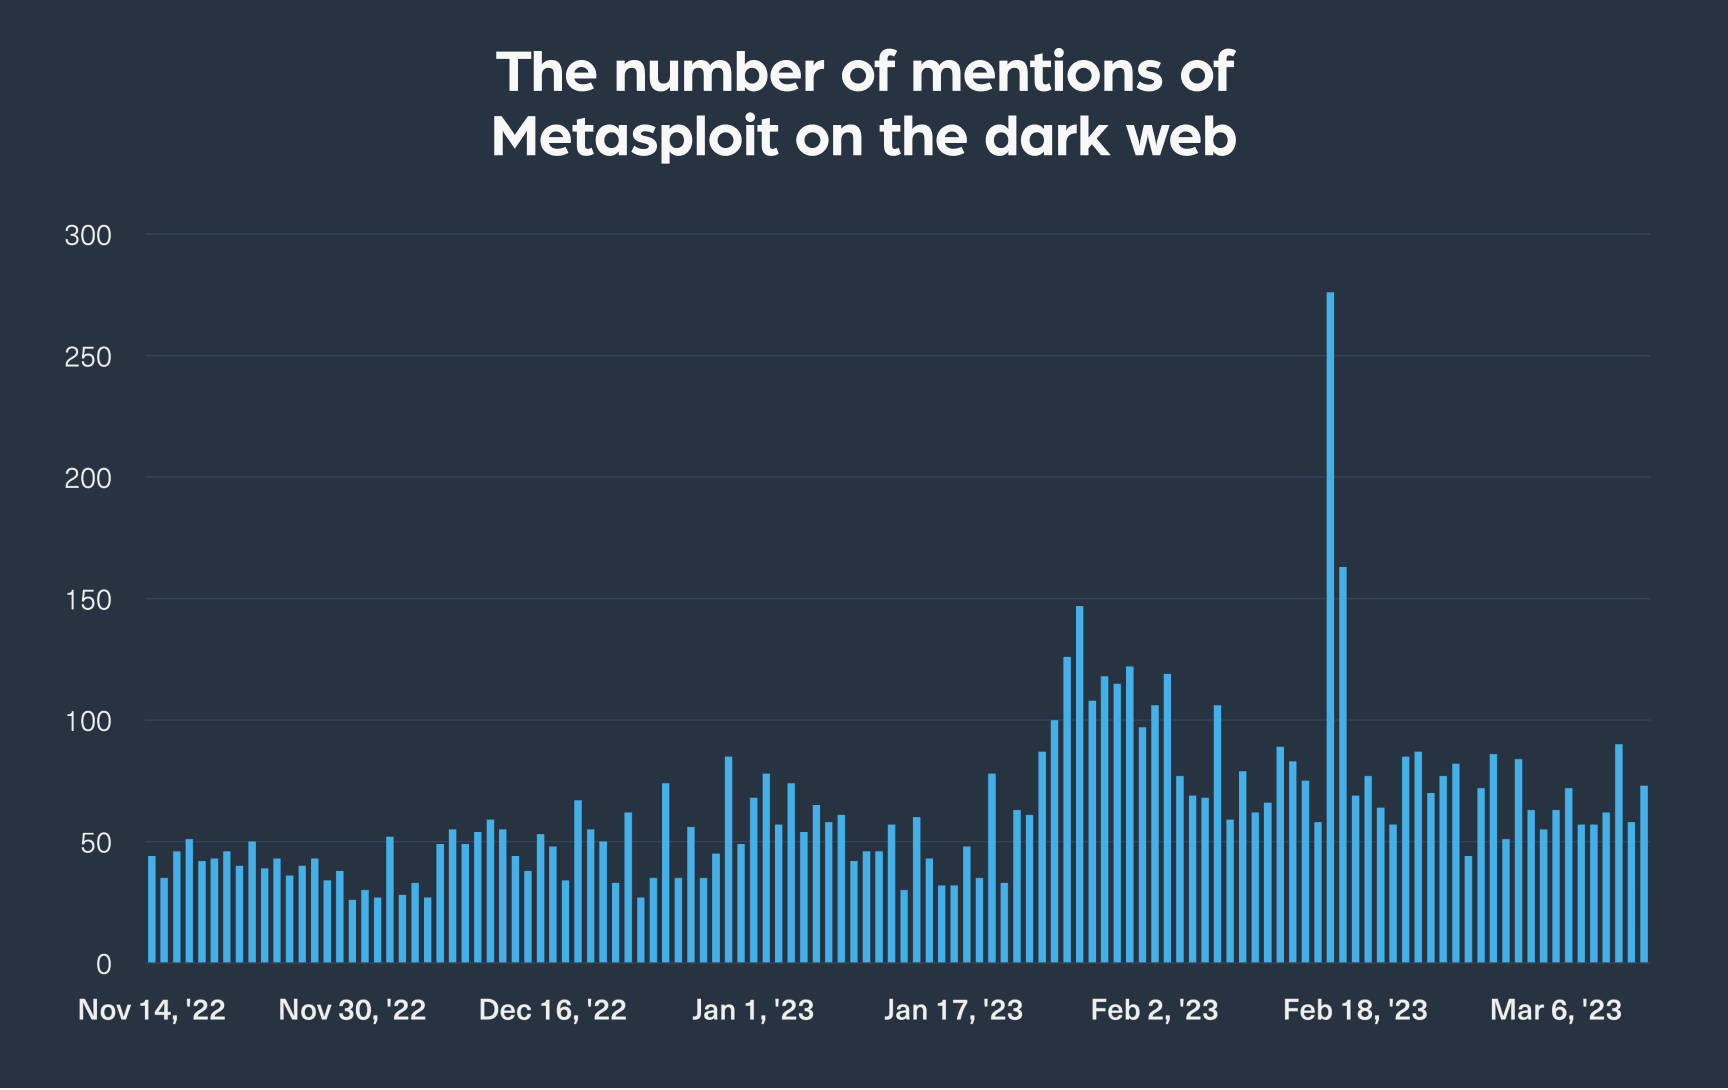 The number of mentions of Metasploit on the dark web from November 2022 to March 2023